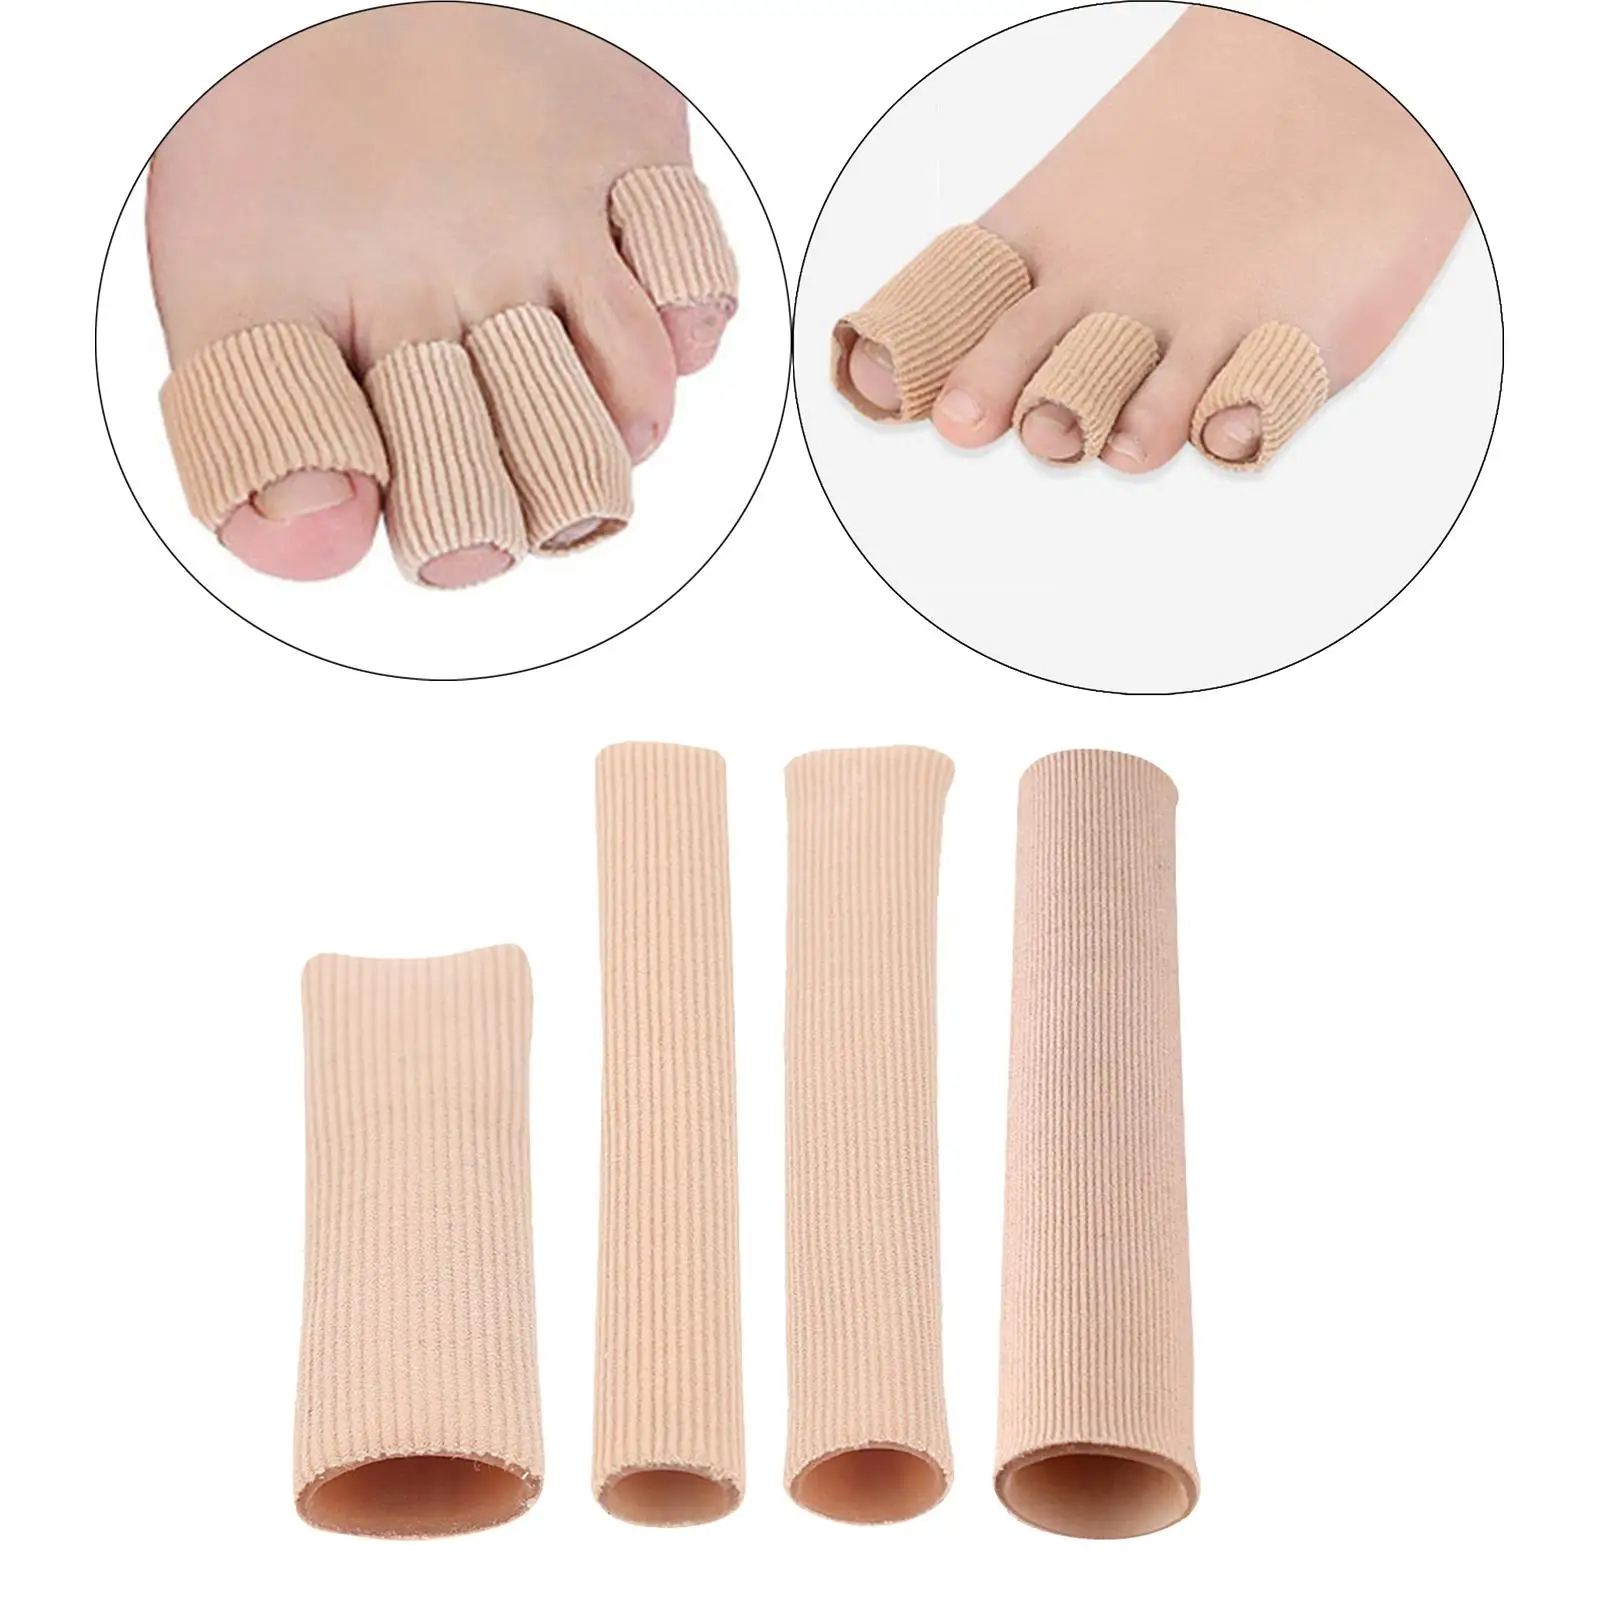 5x Practical Finger Toe Tube Protector Foot Men Compression Blister Bunion